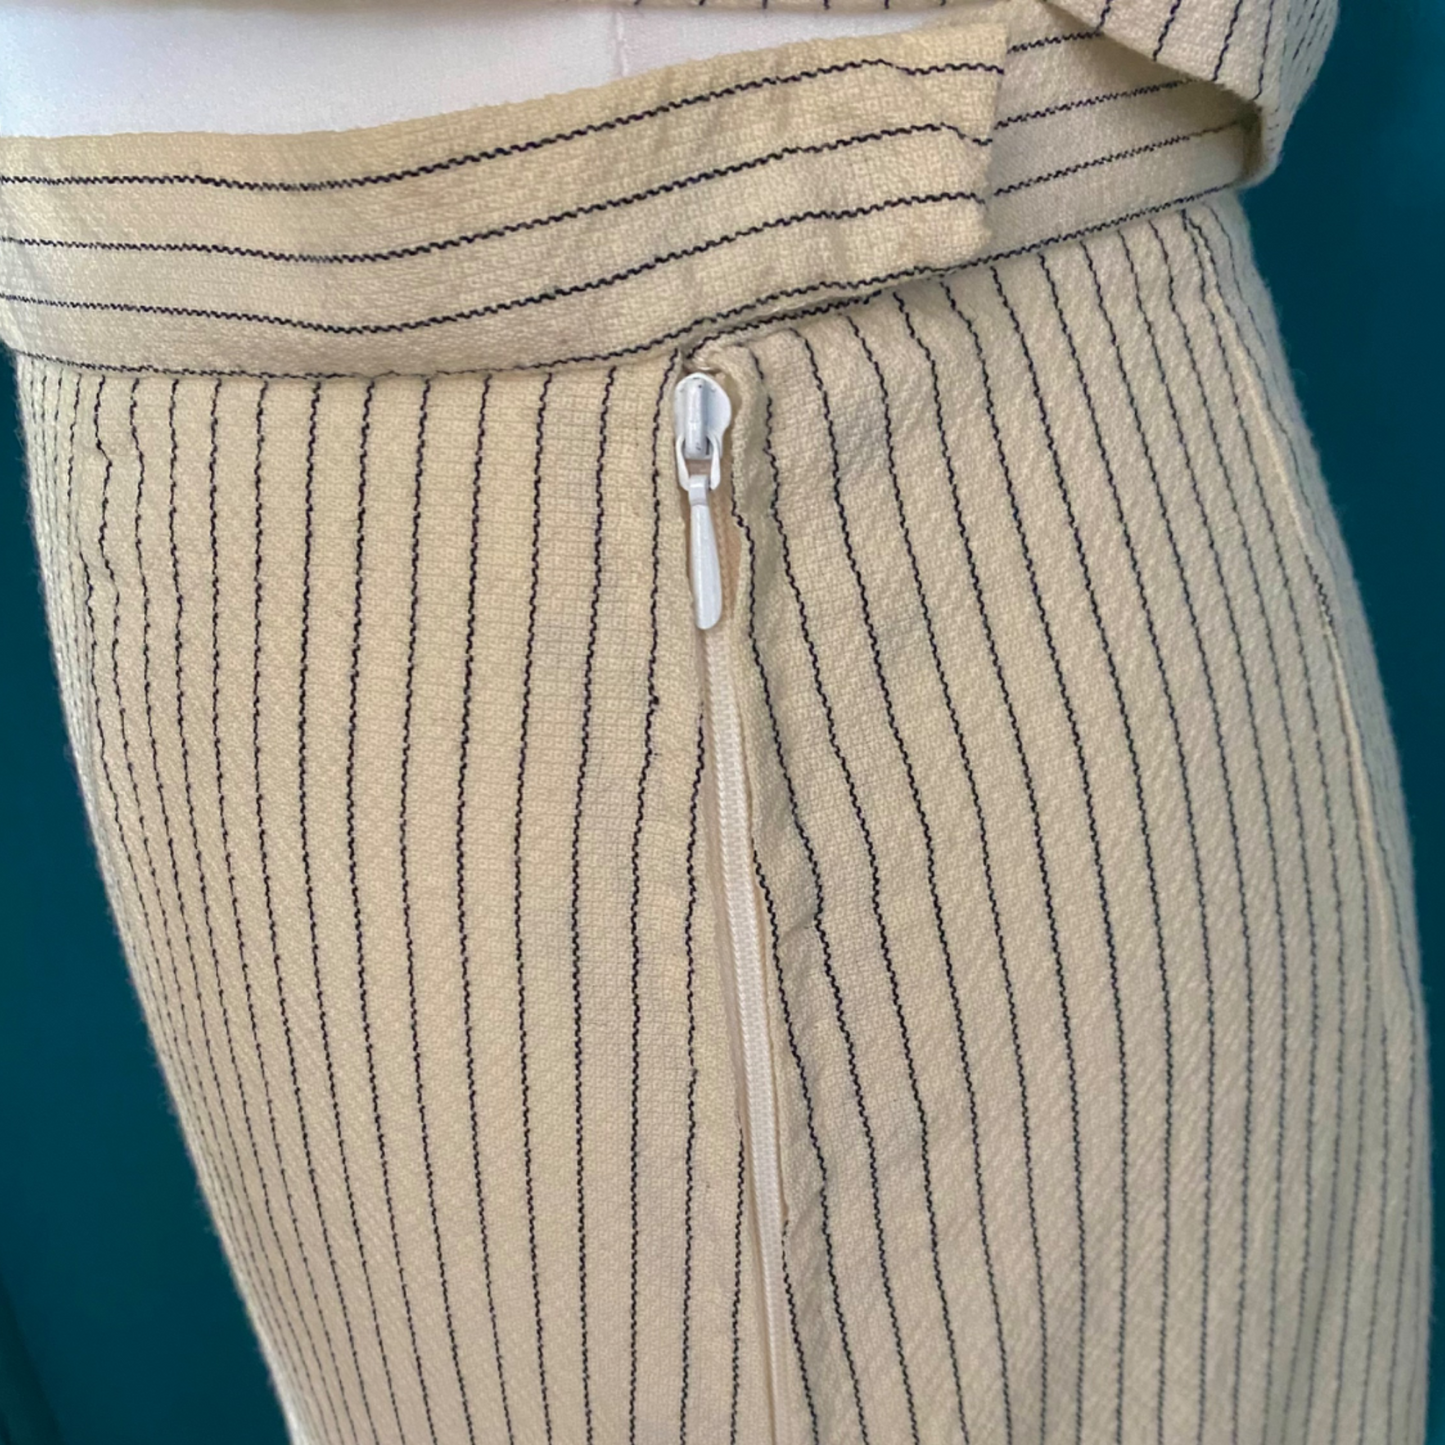 60s cream  and Black fine Pinstripe Skirt Suit – Vintage Co ord set . Approx UK size 8-10